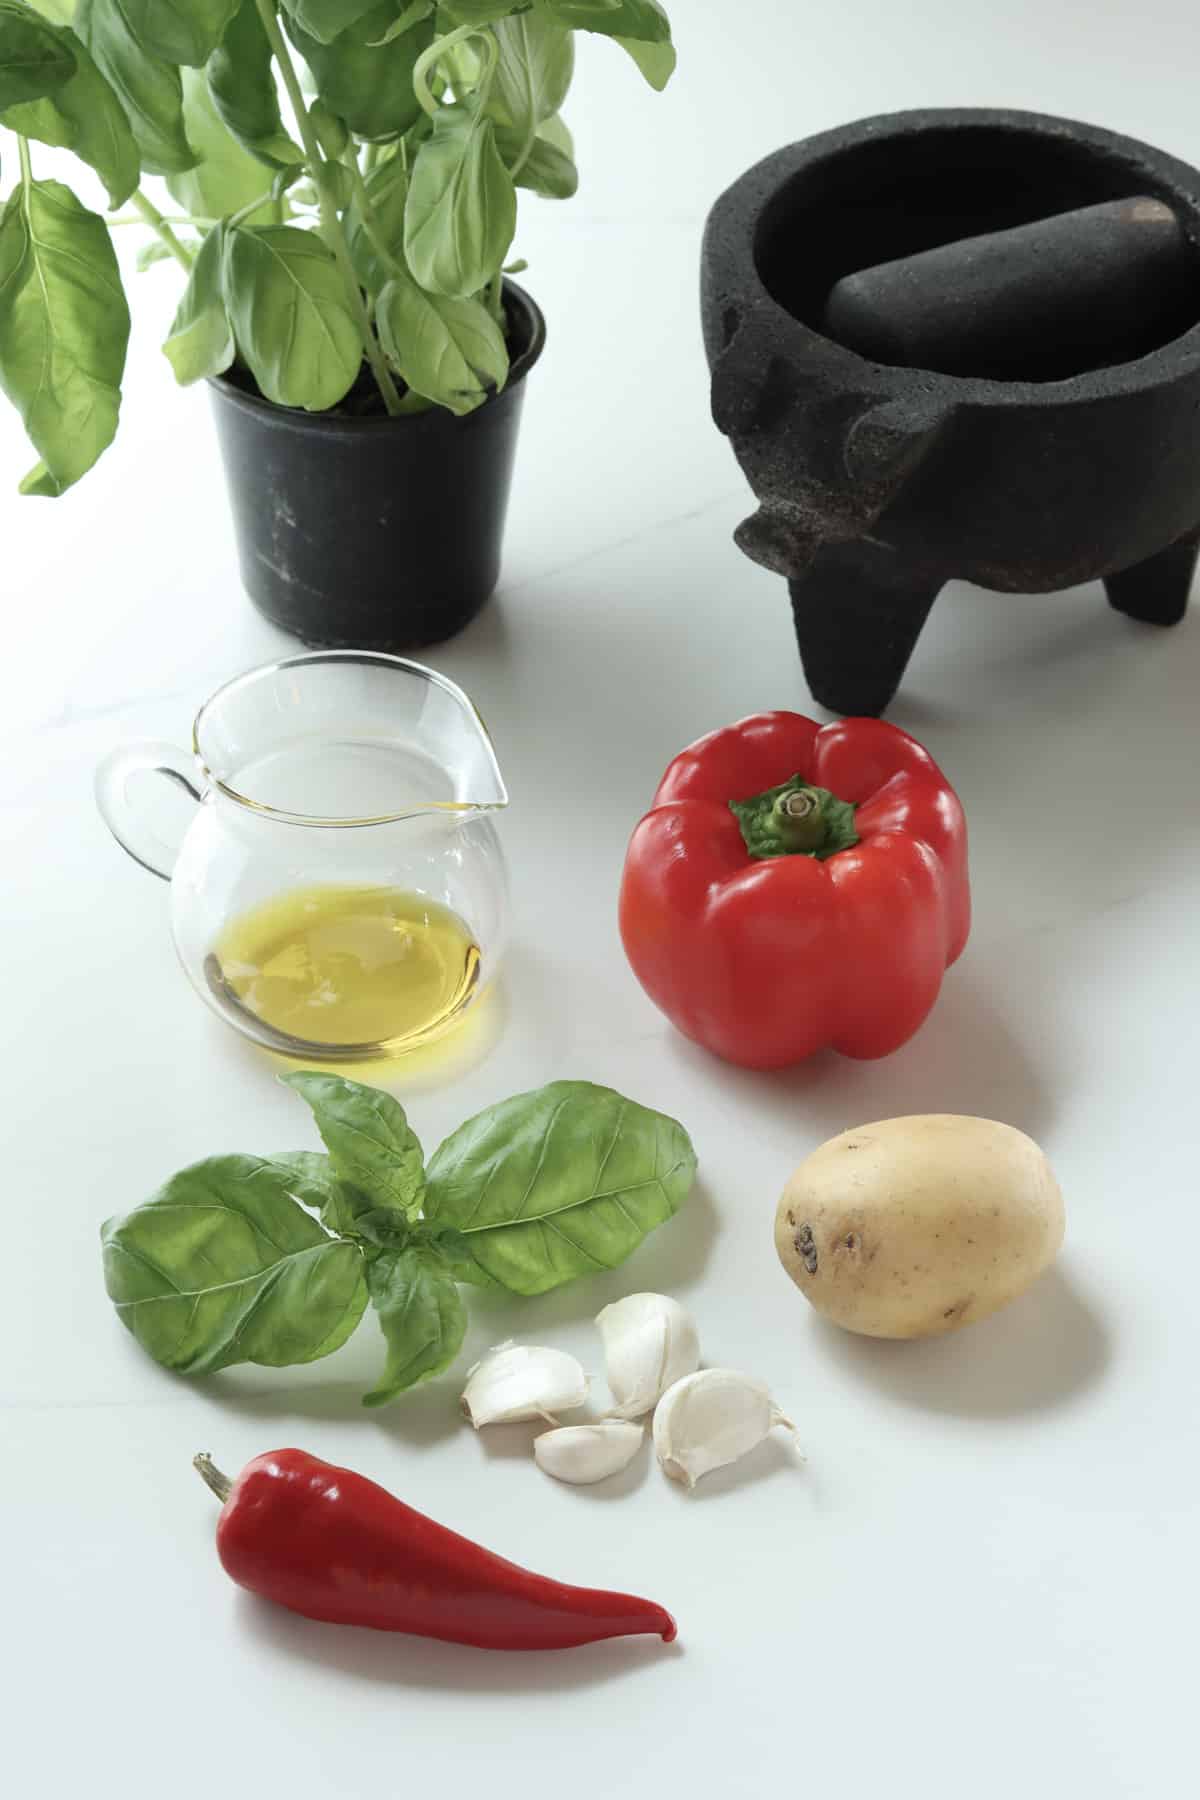 simple ingredients for rouille: basil, chili, garlic, potato, red bell pepper, olive oil